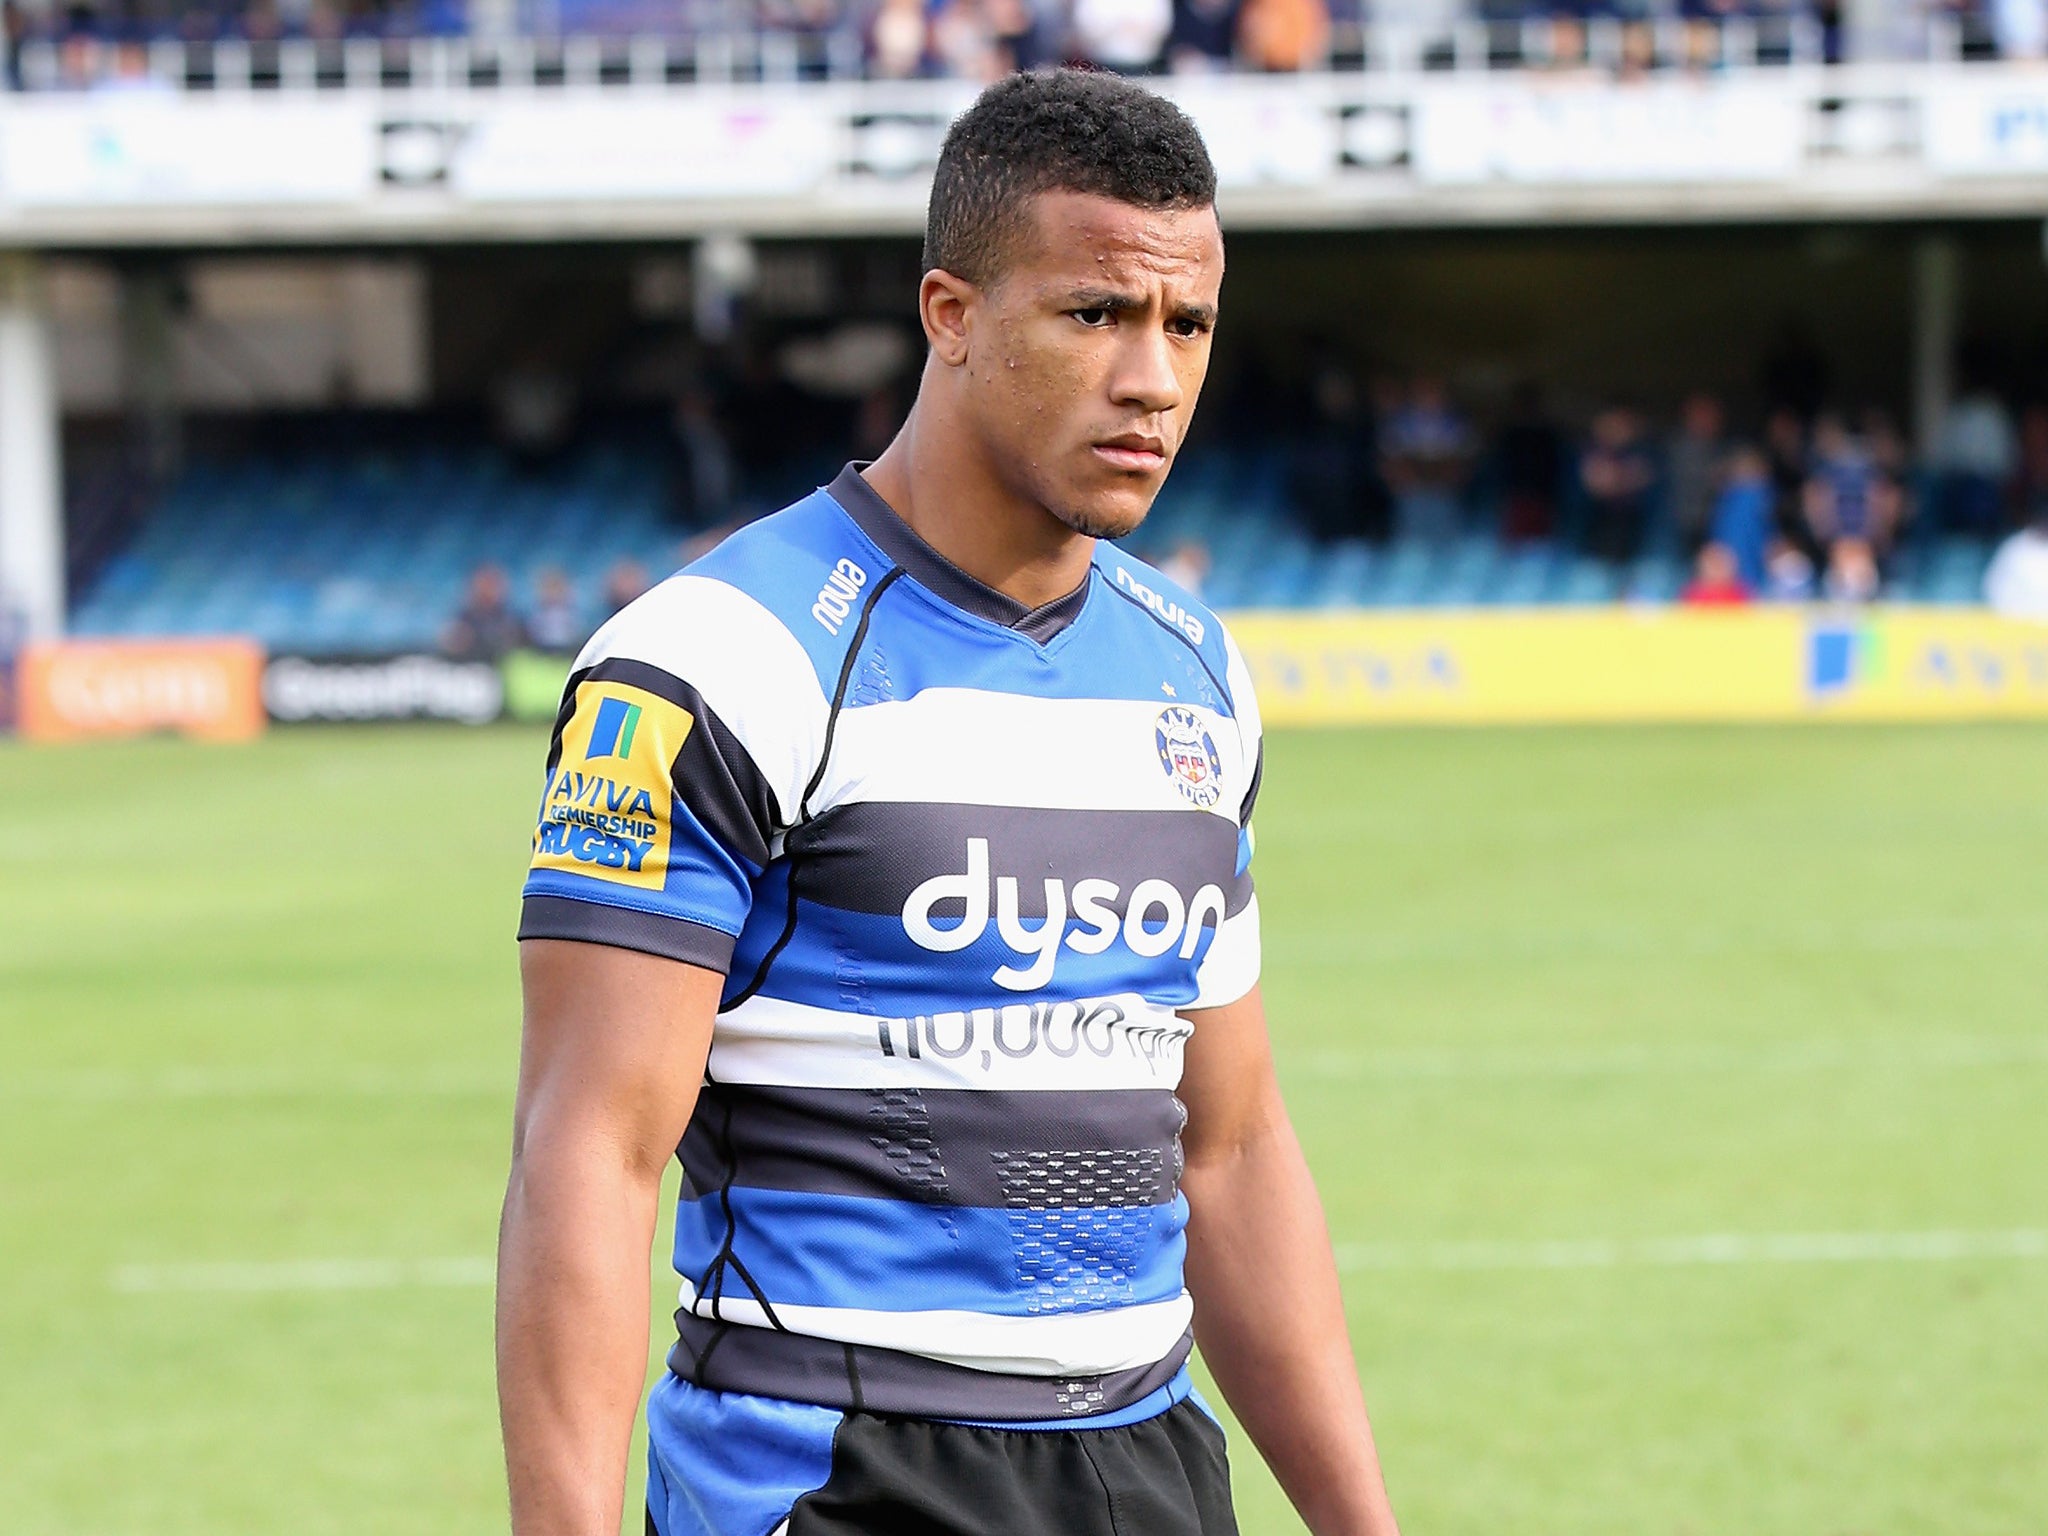 The Bath wing Anthony Watson is expected to start off the bench against Saracens